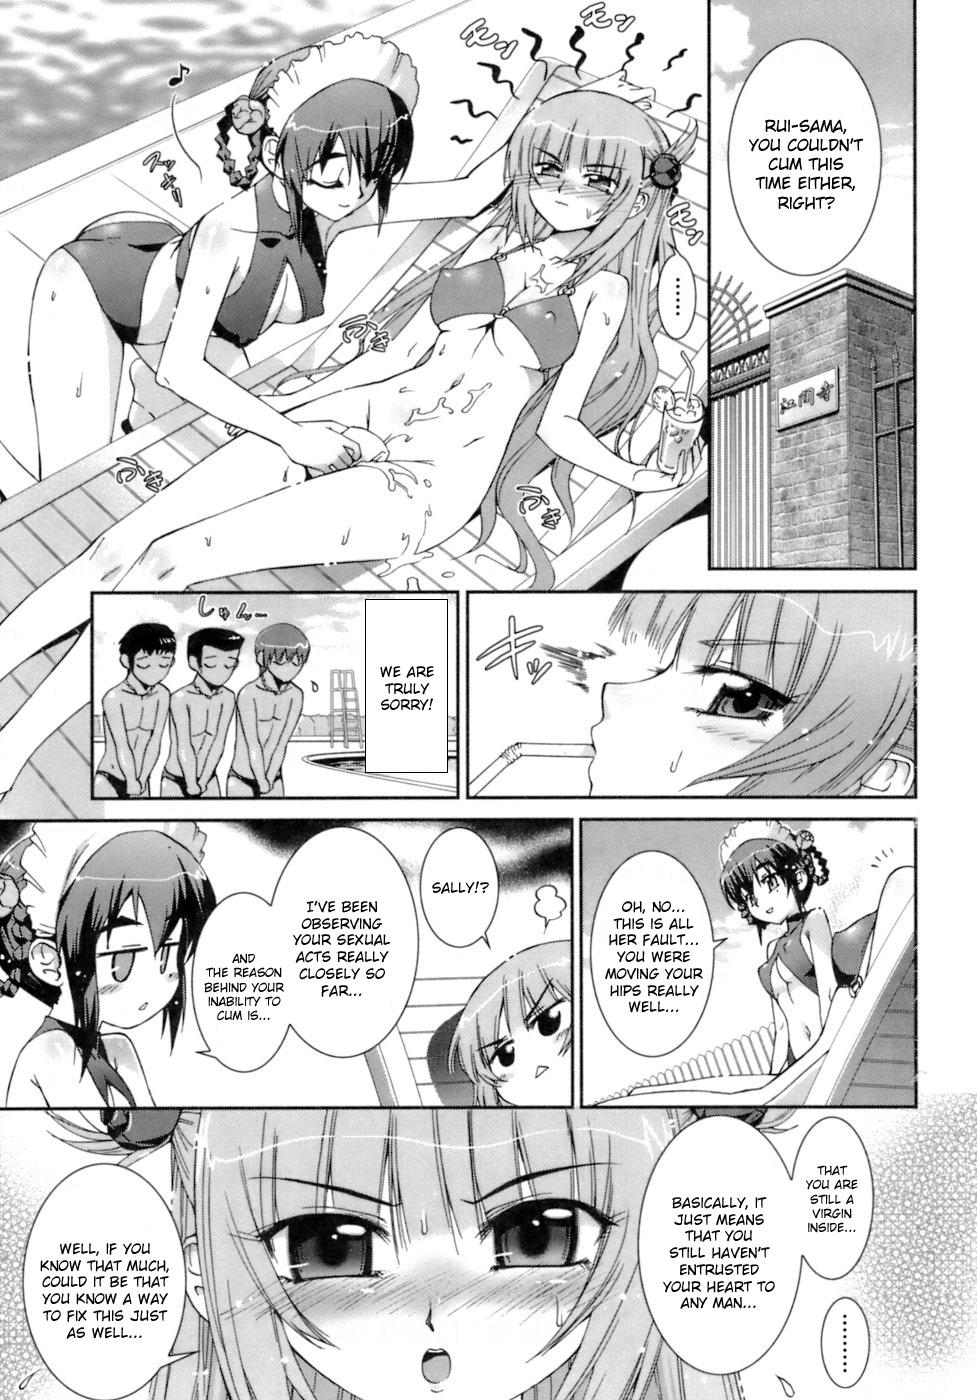 The Pollinic Girls Attack Vol. 1 Ch. 1-6 23